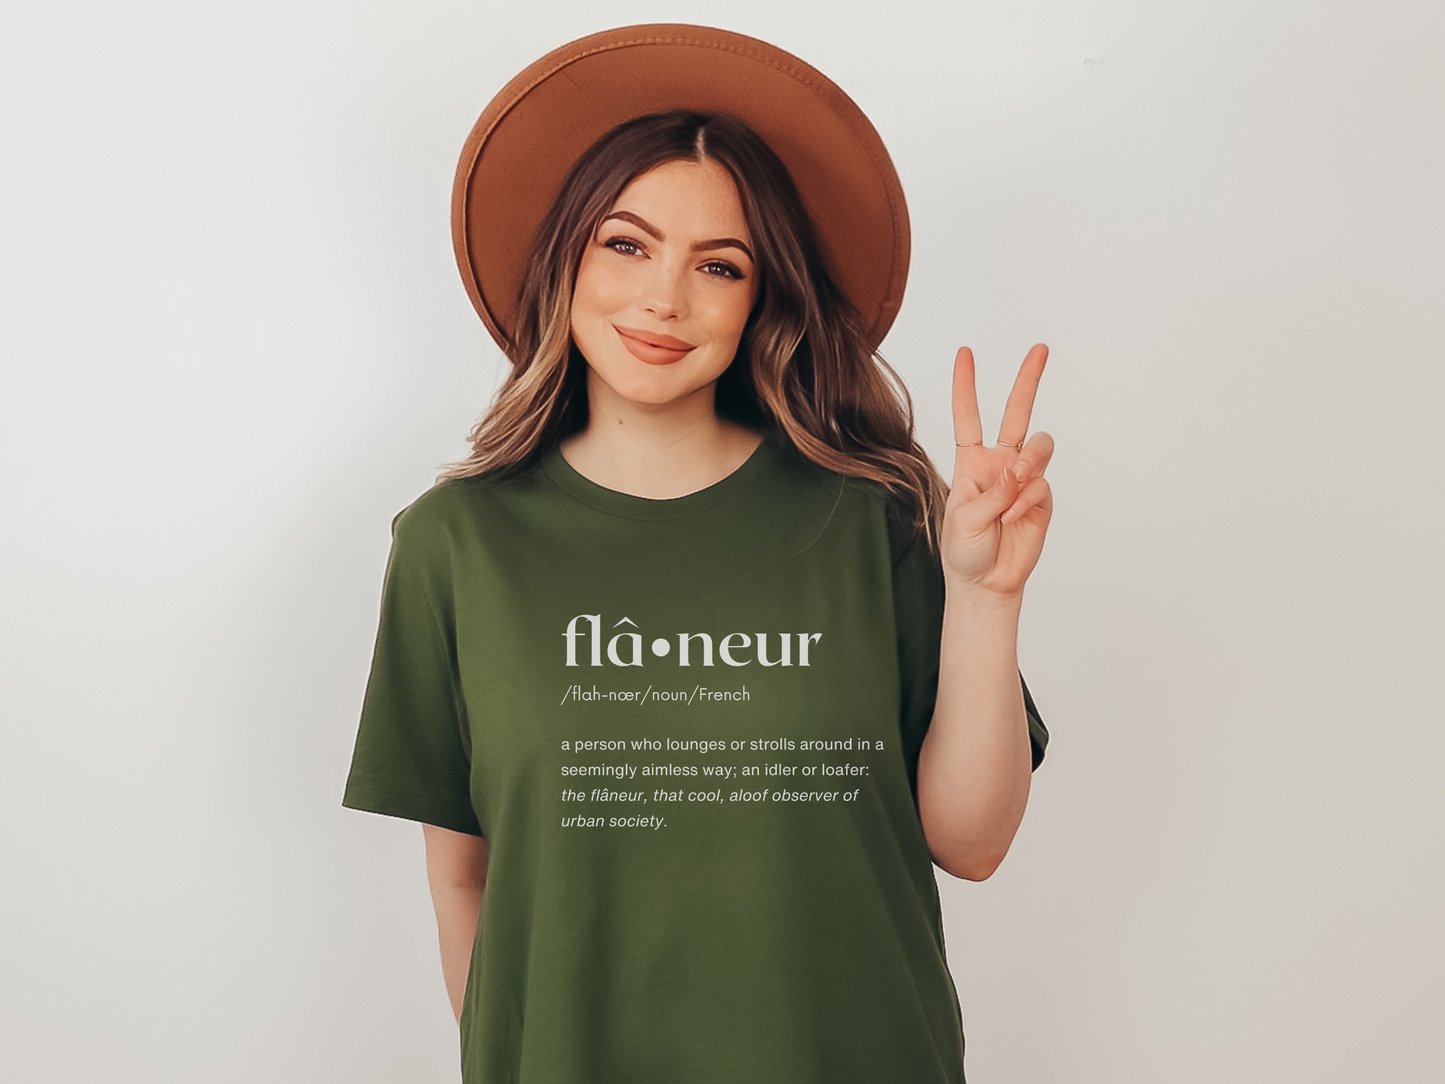 Flâneur "Wanderer" French Word T-Shirt in Olive